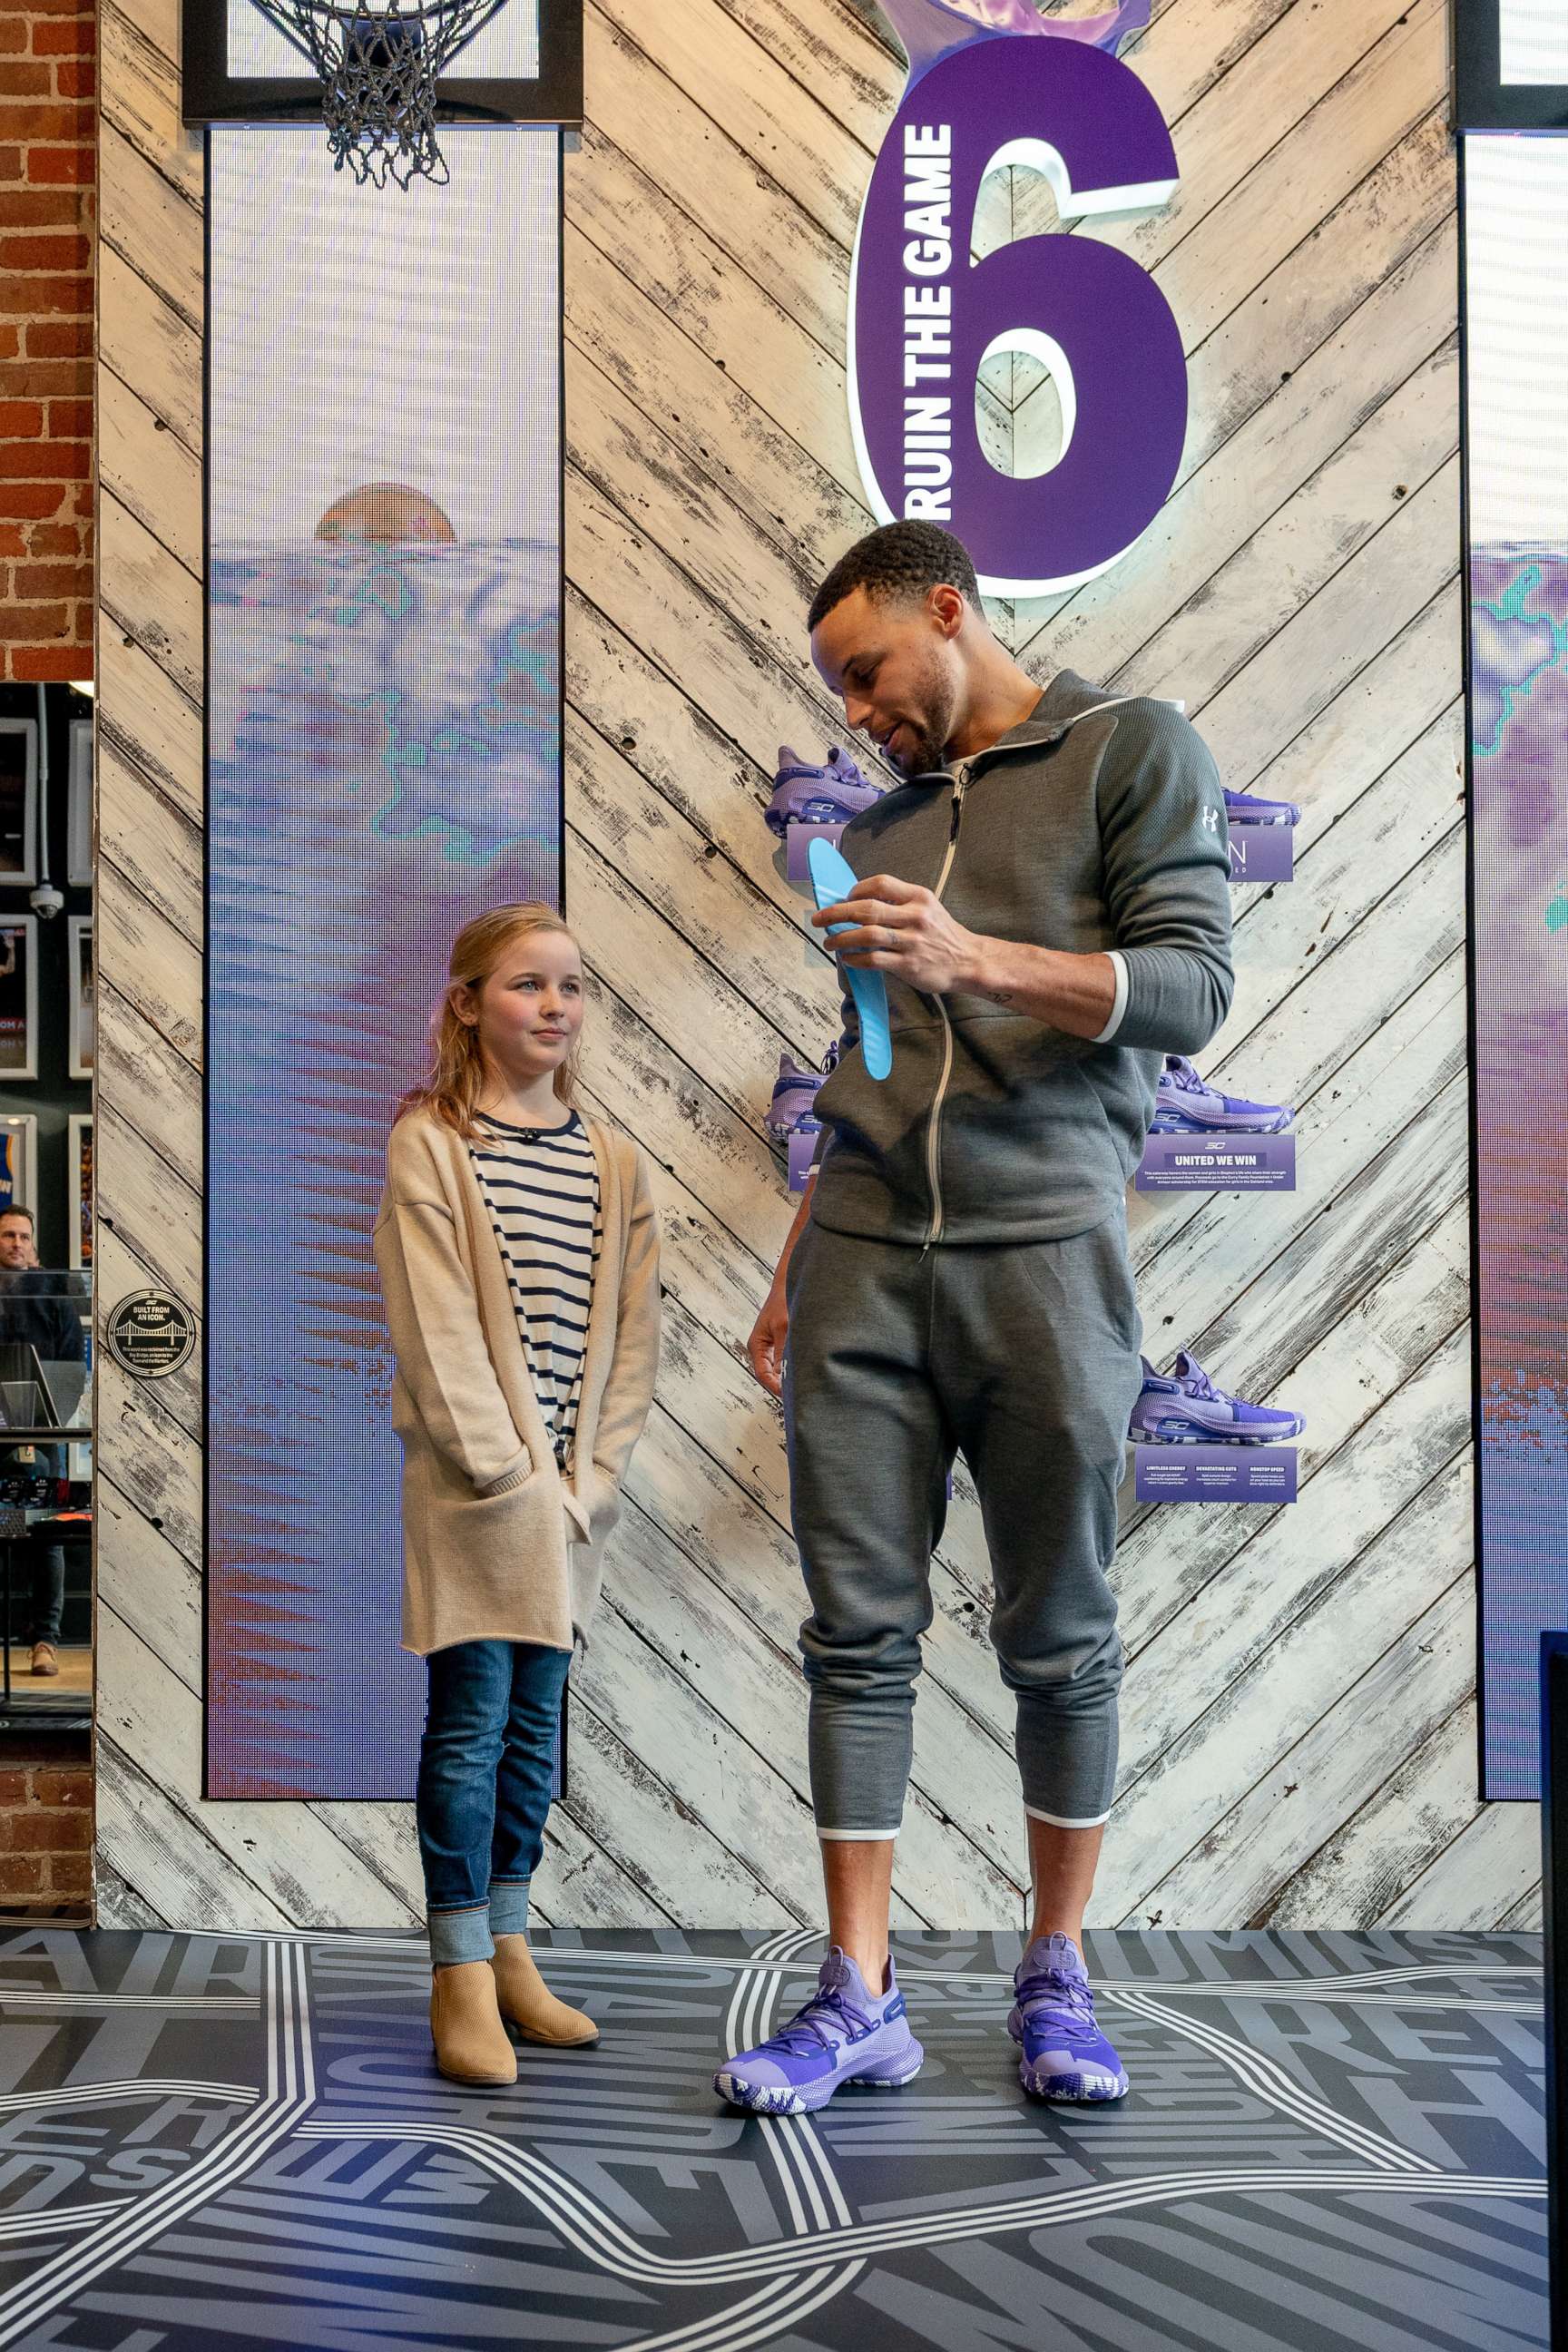 PHOTO: Riley Morrison met her basketball idol Stephen Curry at a pop-up event in Oakland, Calif.